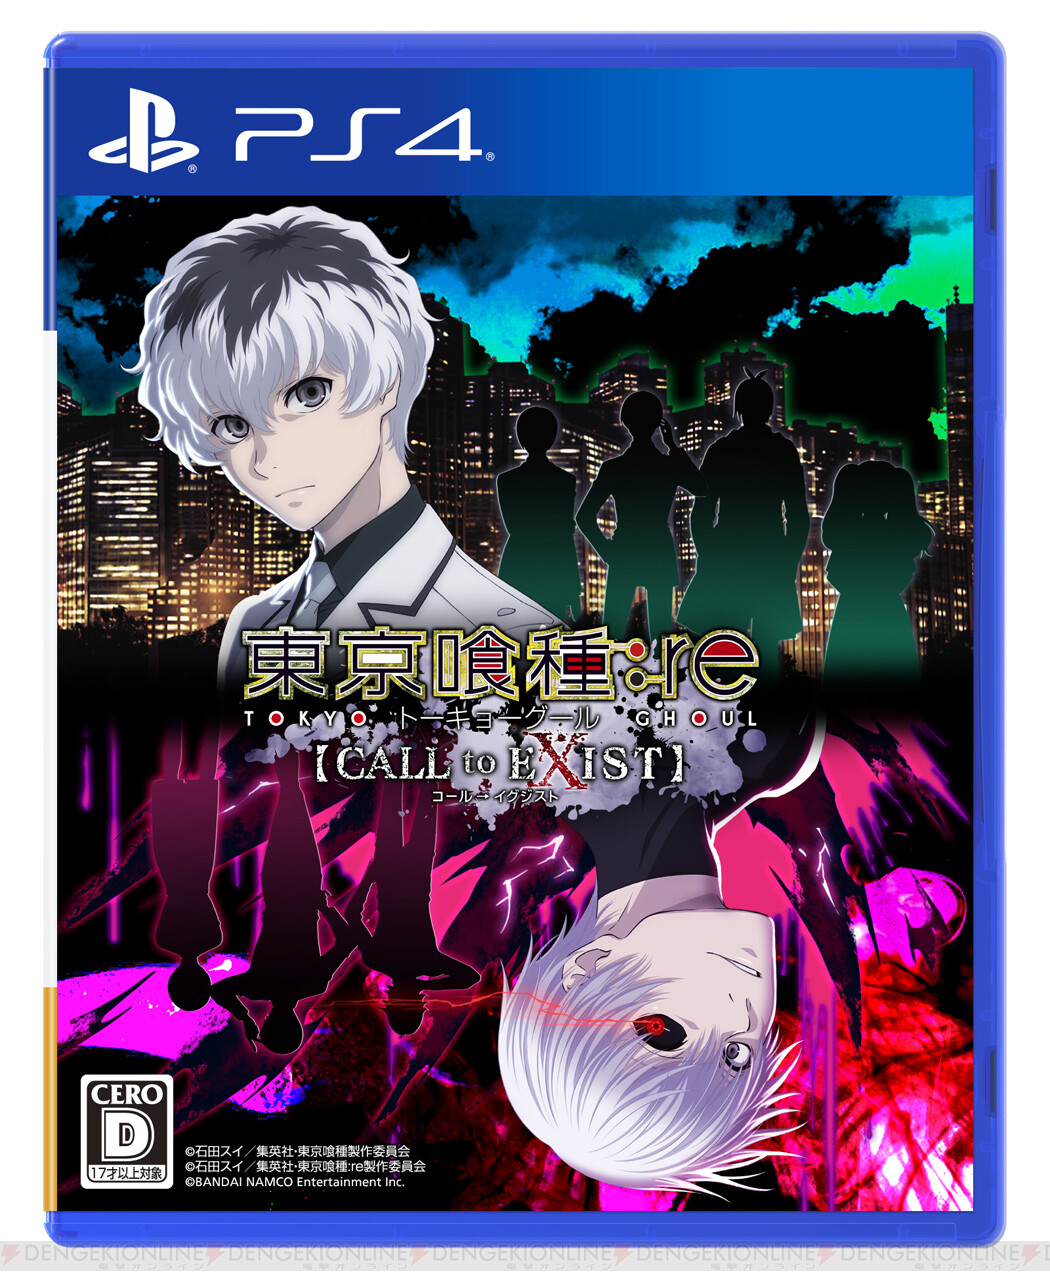 Ps4 東京喰種 Re Call To Exist 本日発売 早期購入特典はカネキなりきりセット 電撃オンライン